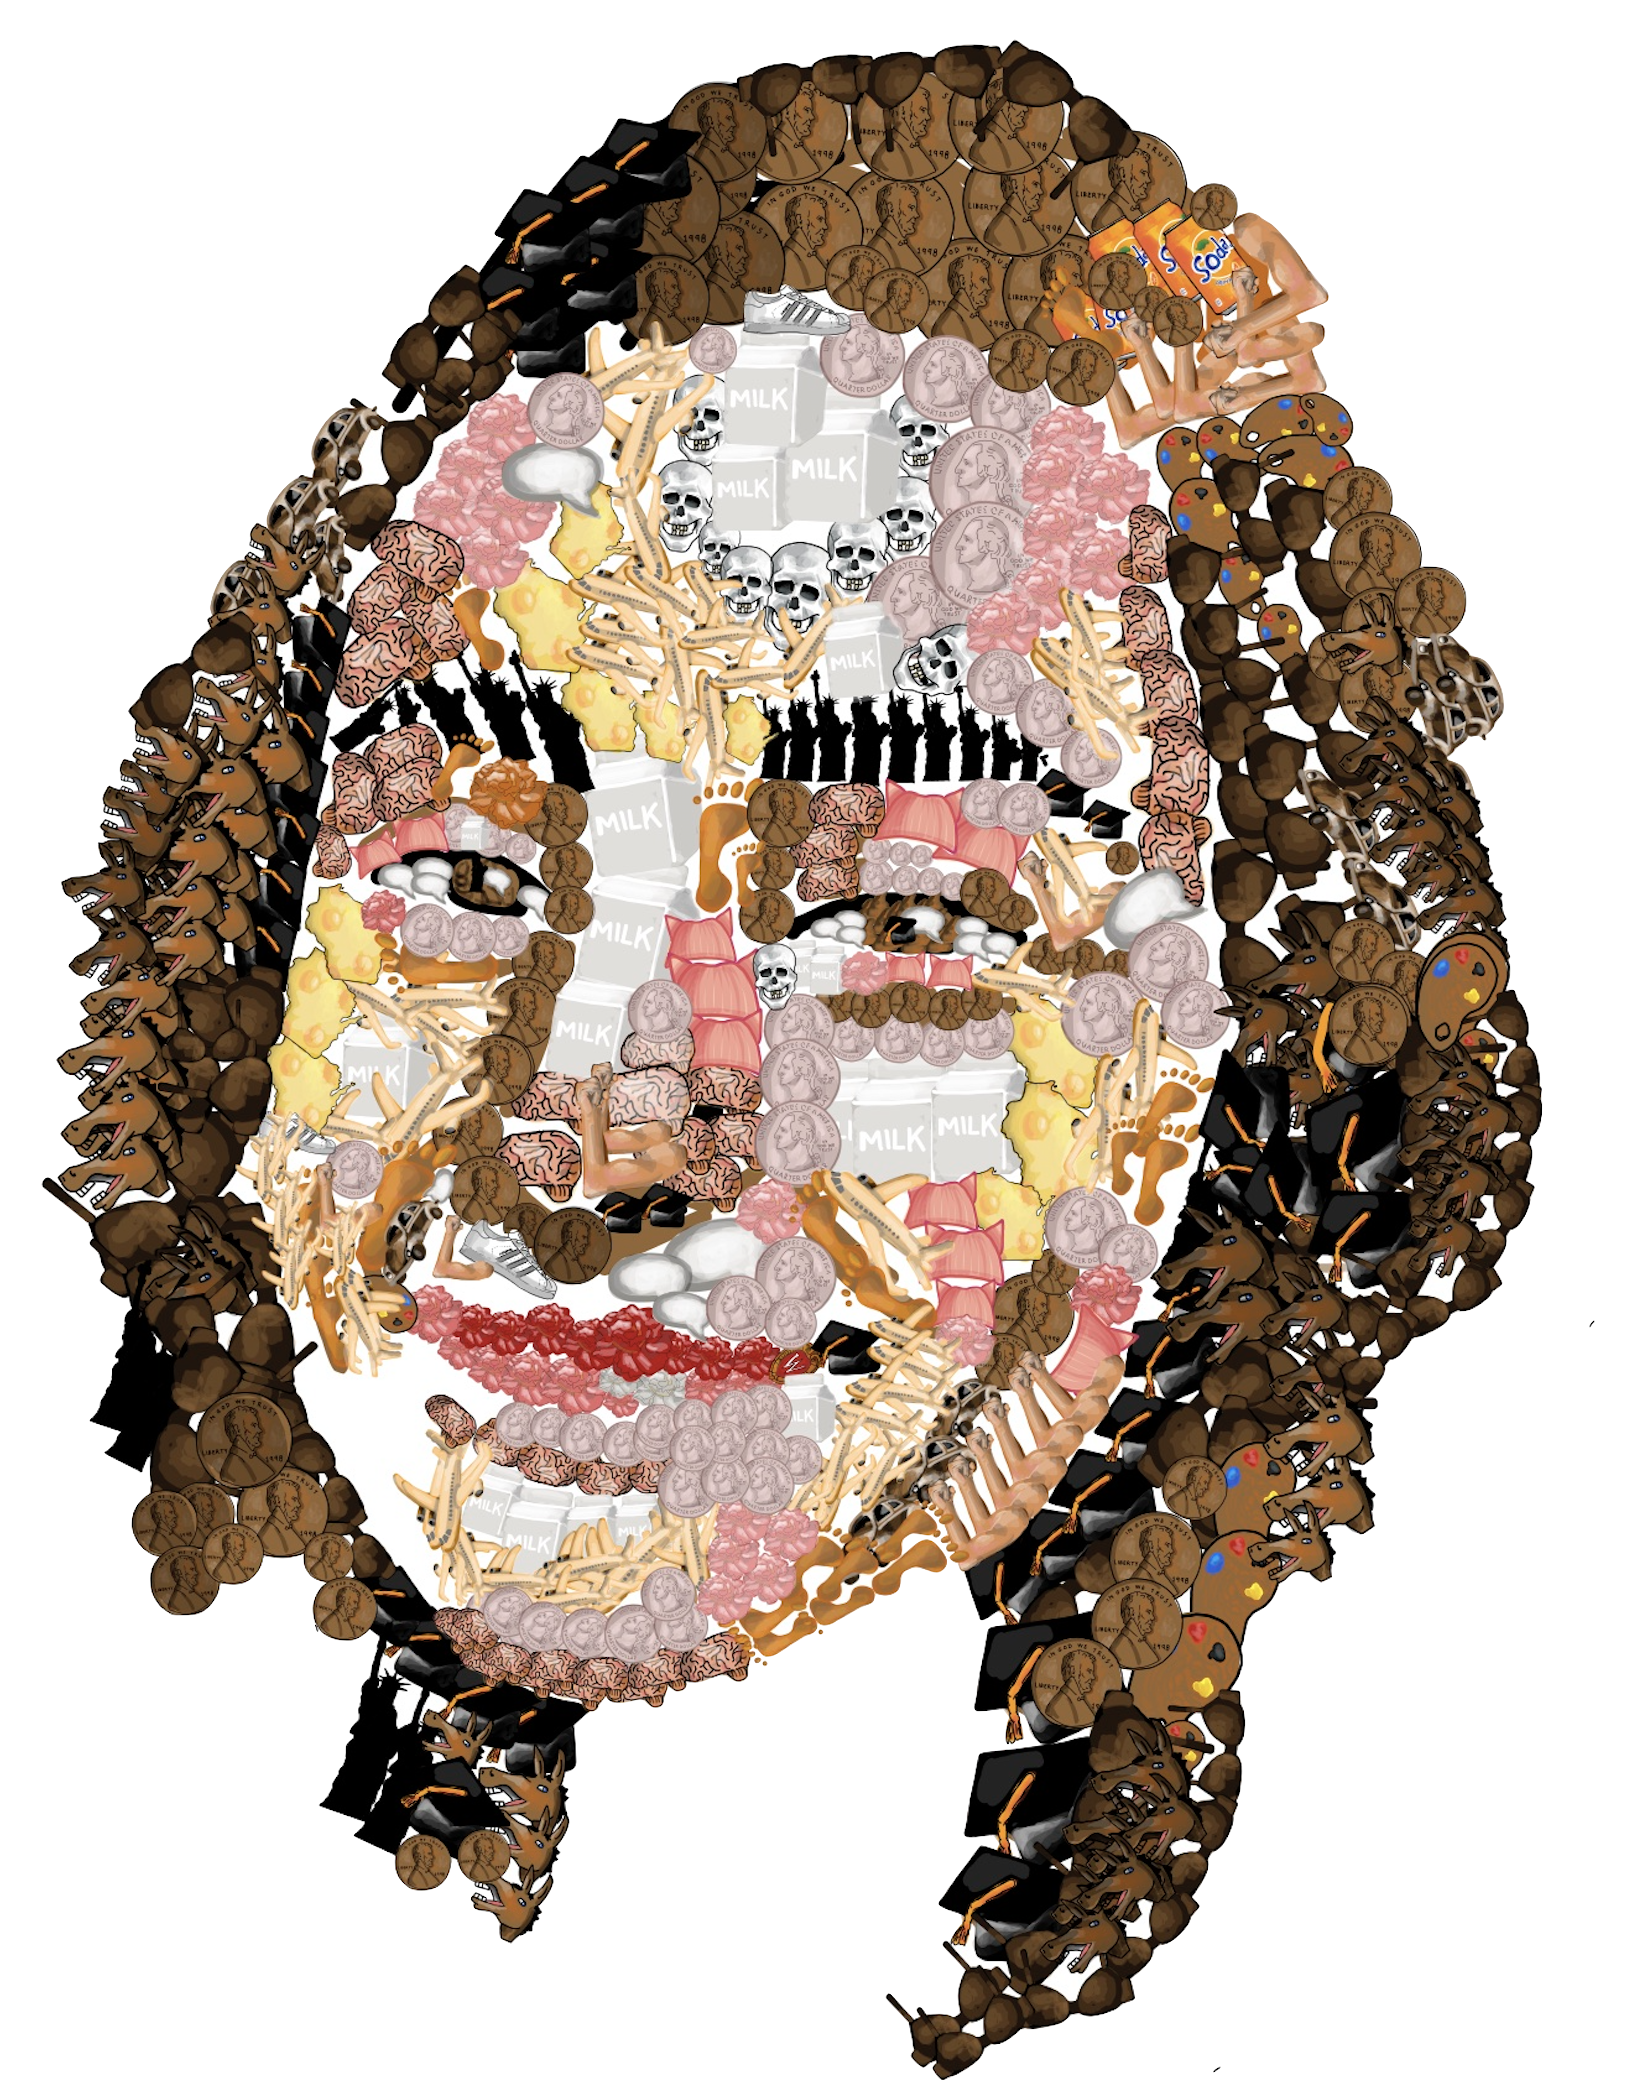 Self-Portrait of Lily's face made up of many smaller object 